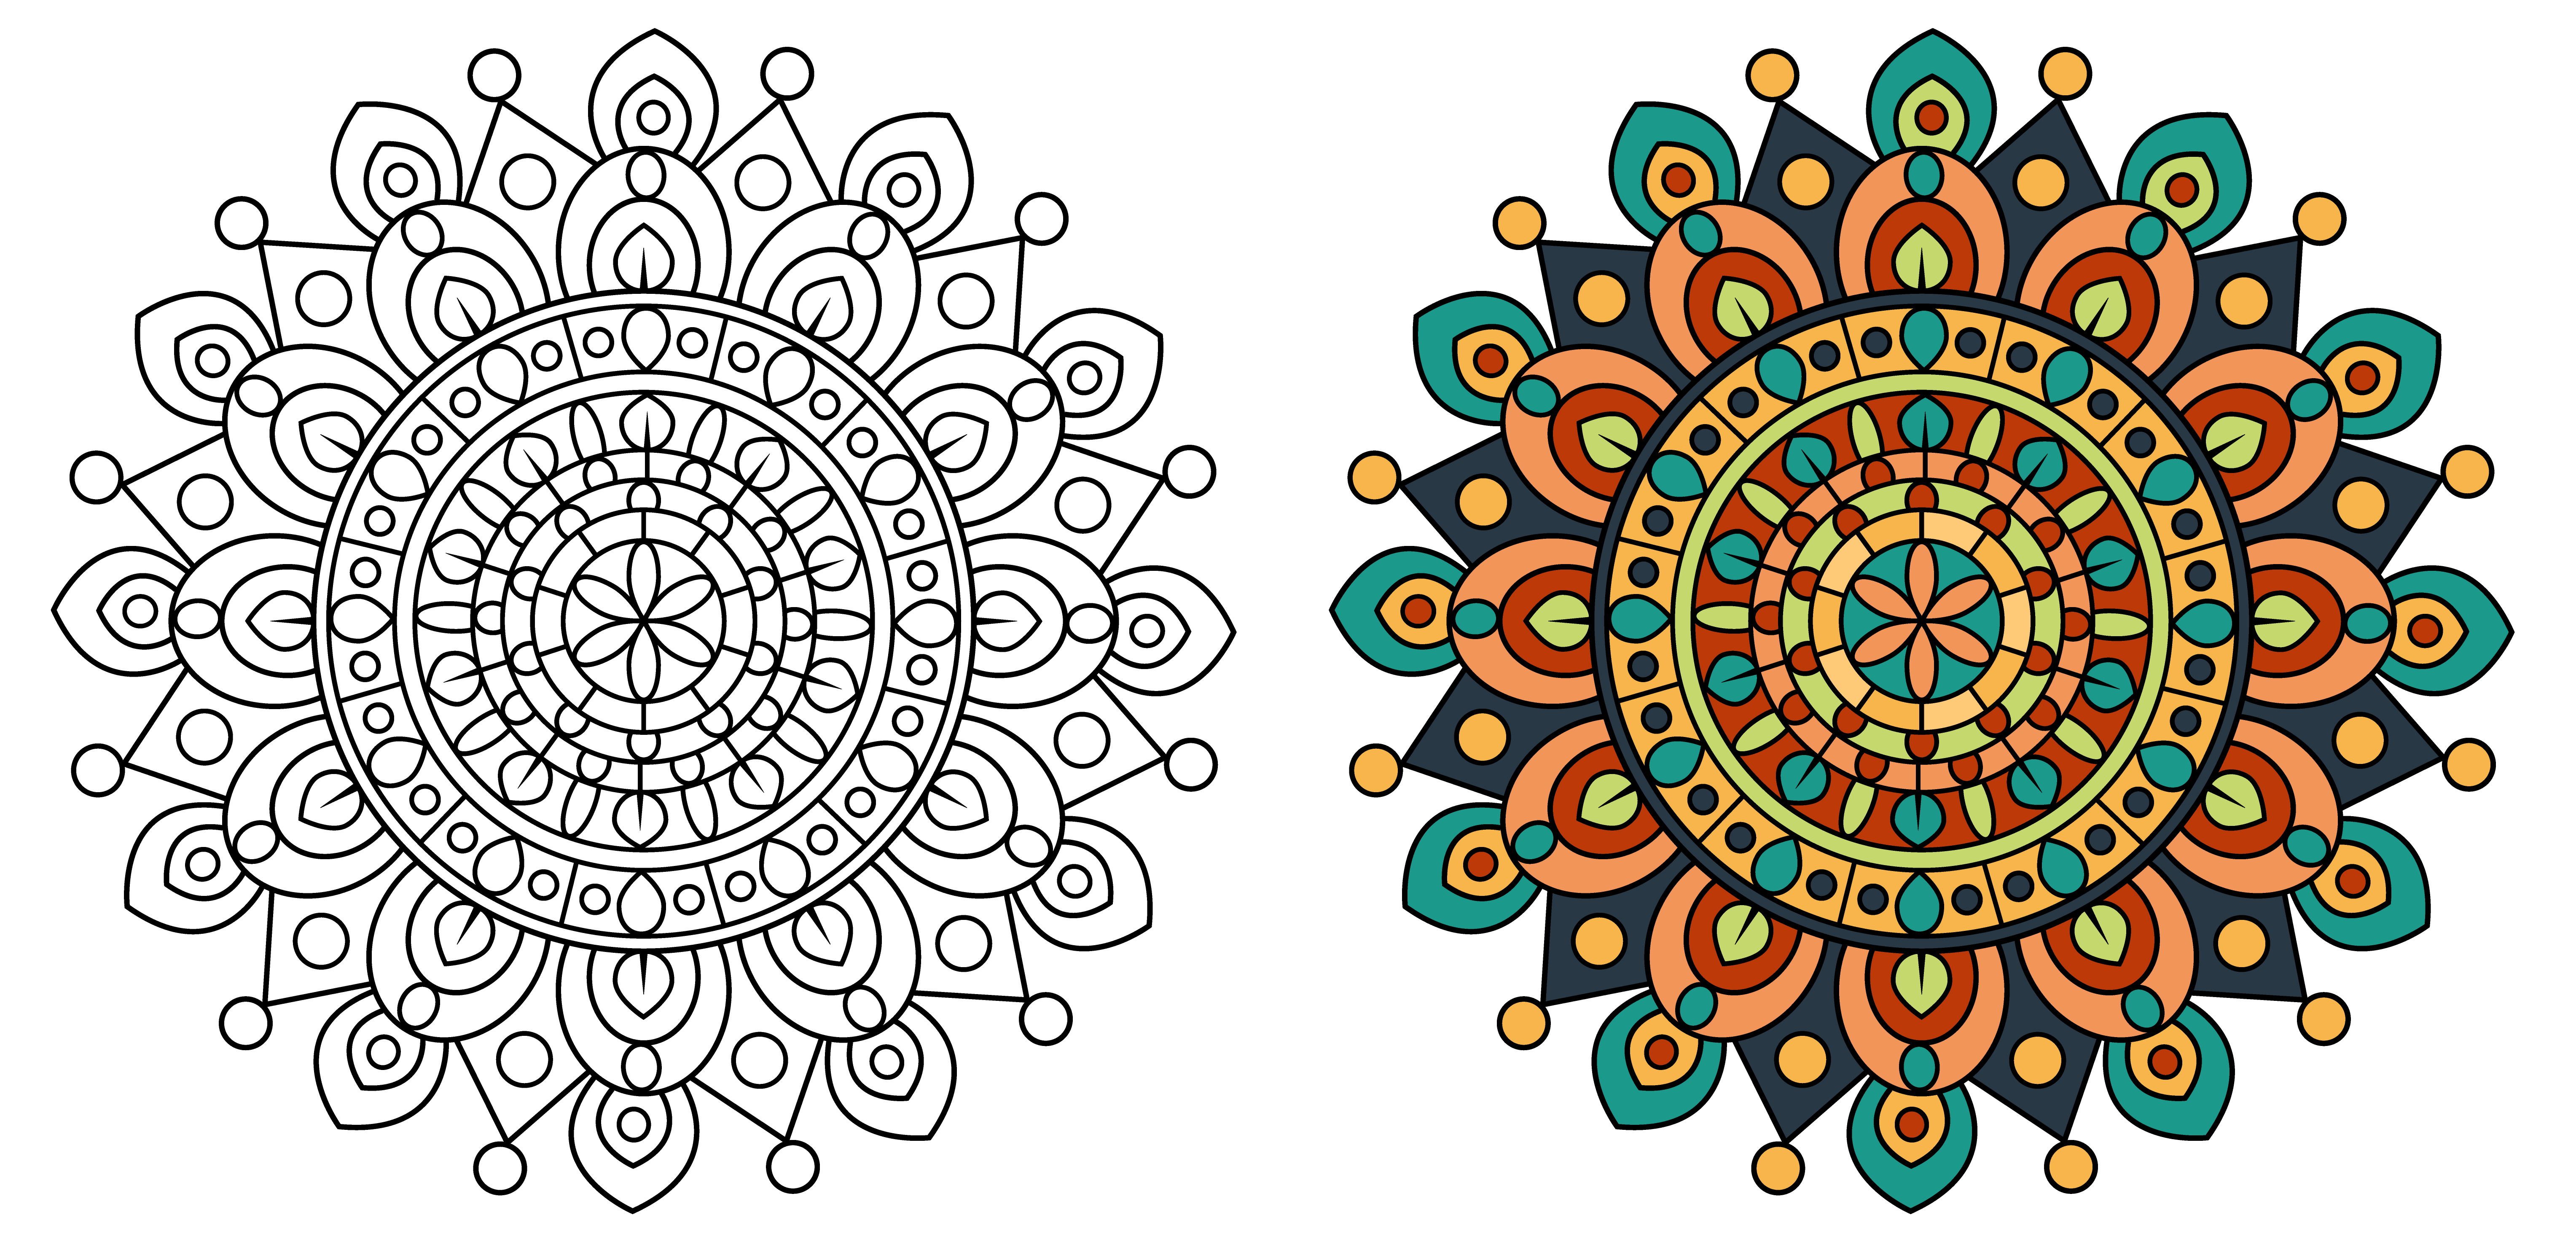 Download Mandala Design Coloring Page Template Outline 1229196 - Download Free Vectors, Clipart Graphics ...